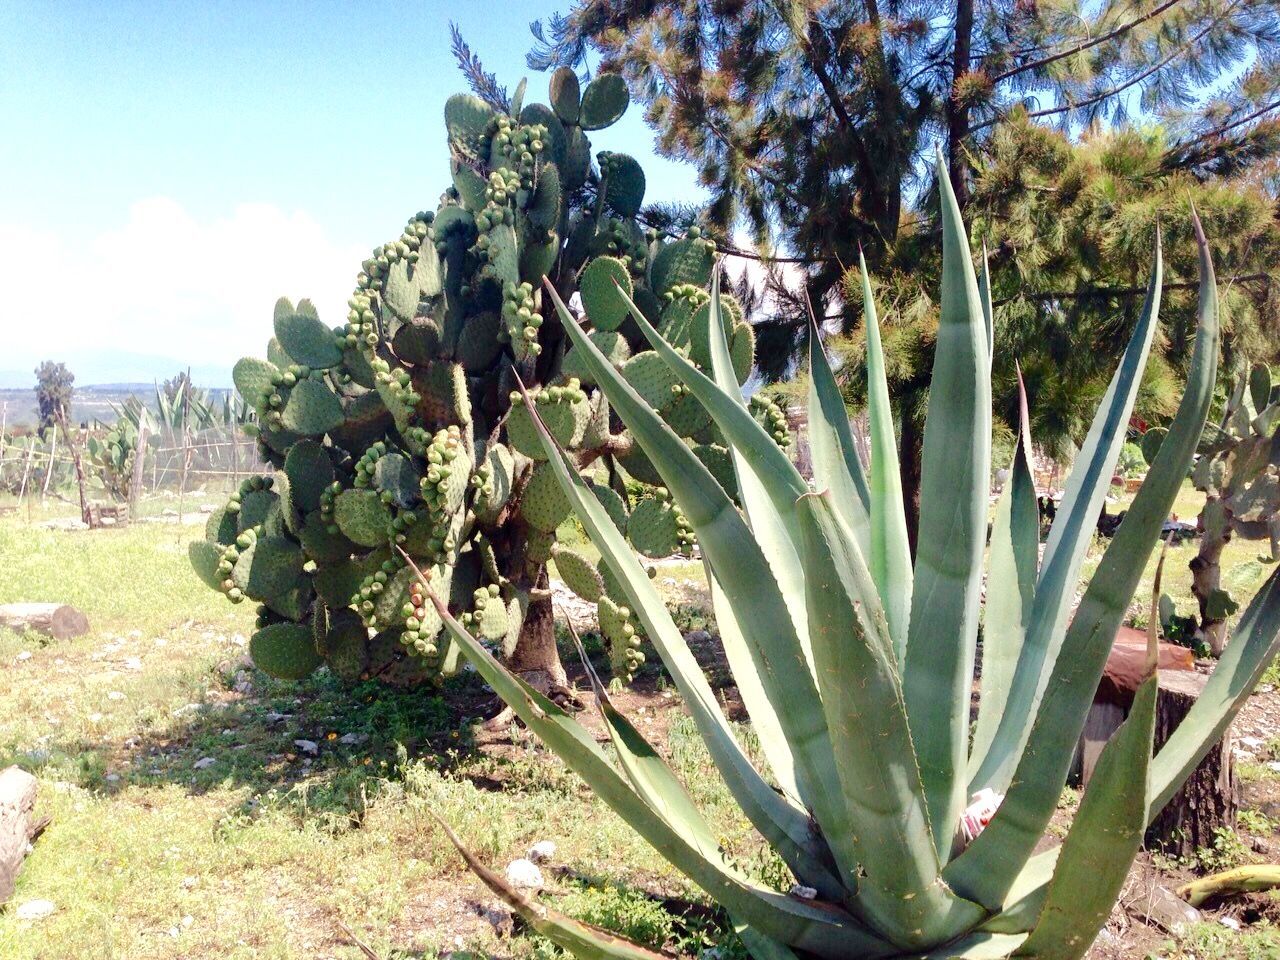 View of agave